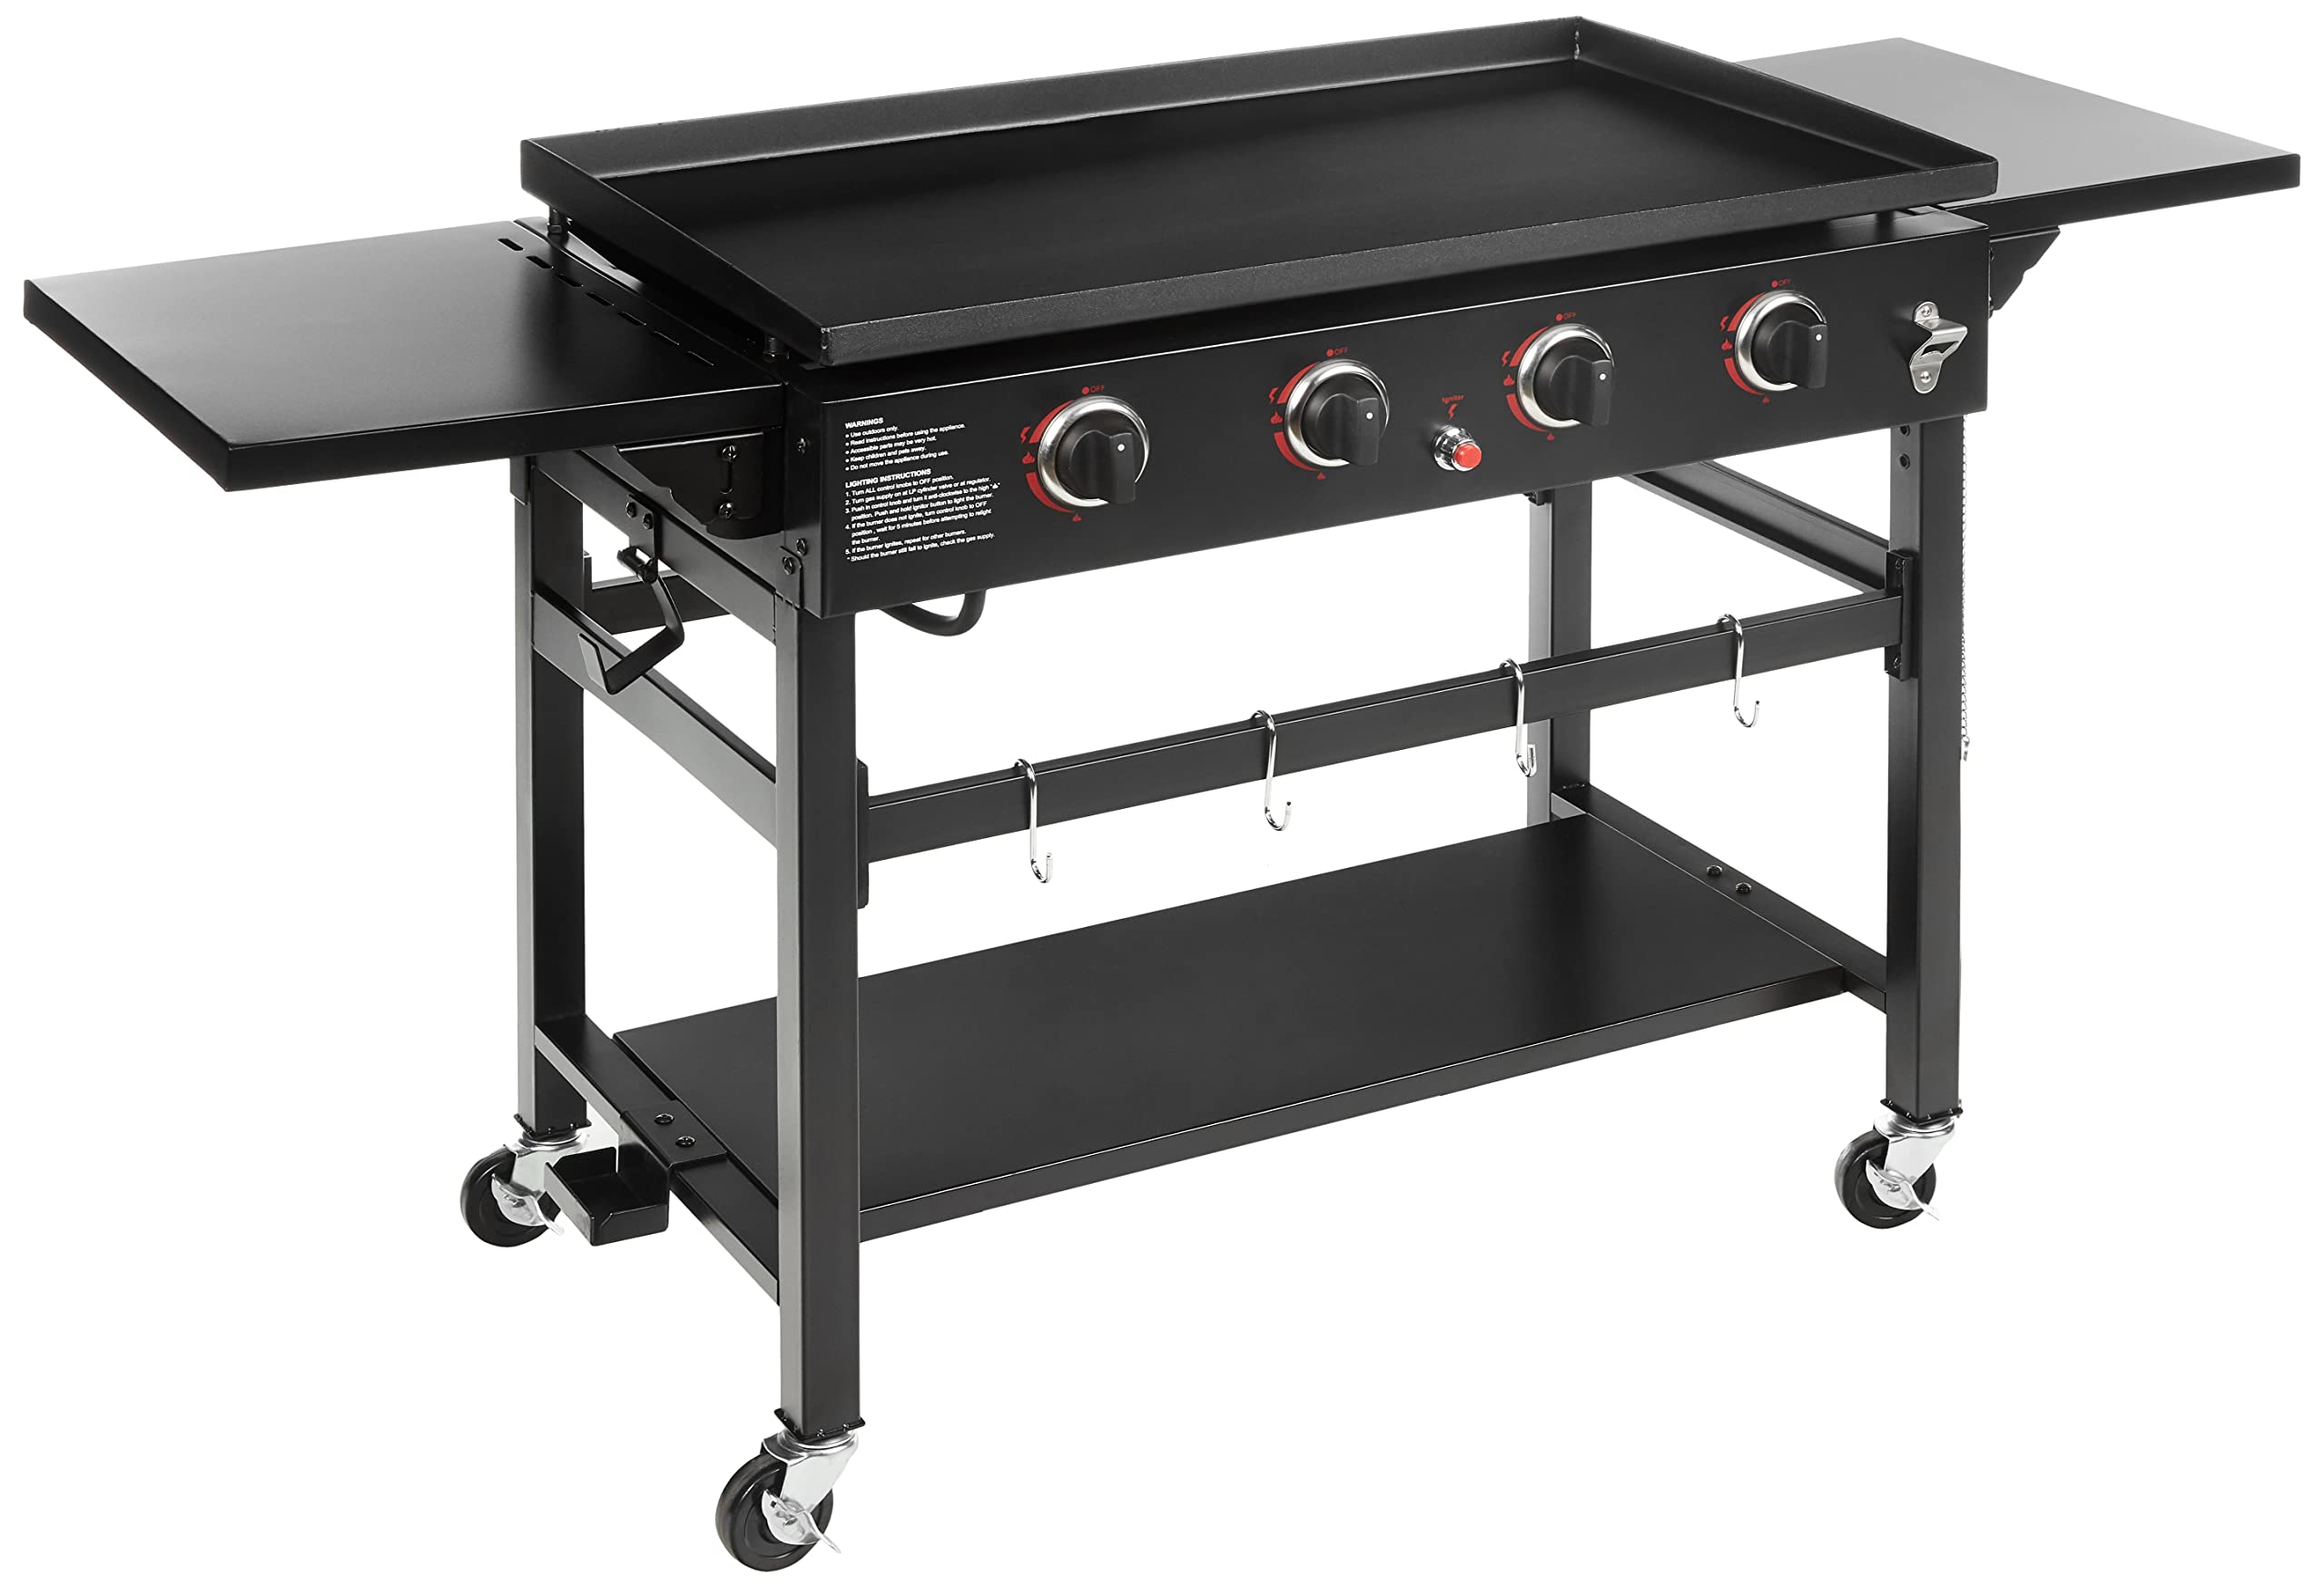 Amazon Basics Outdoor 4 Burner Gas Griddle with 36-Inch Matte Enamel Coated Griddle Top and Side Shelfs - $251.01 + F/S - Amazon